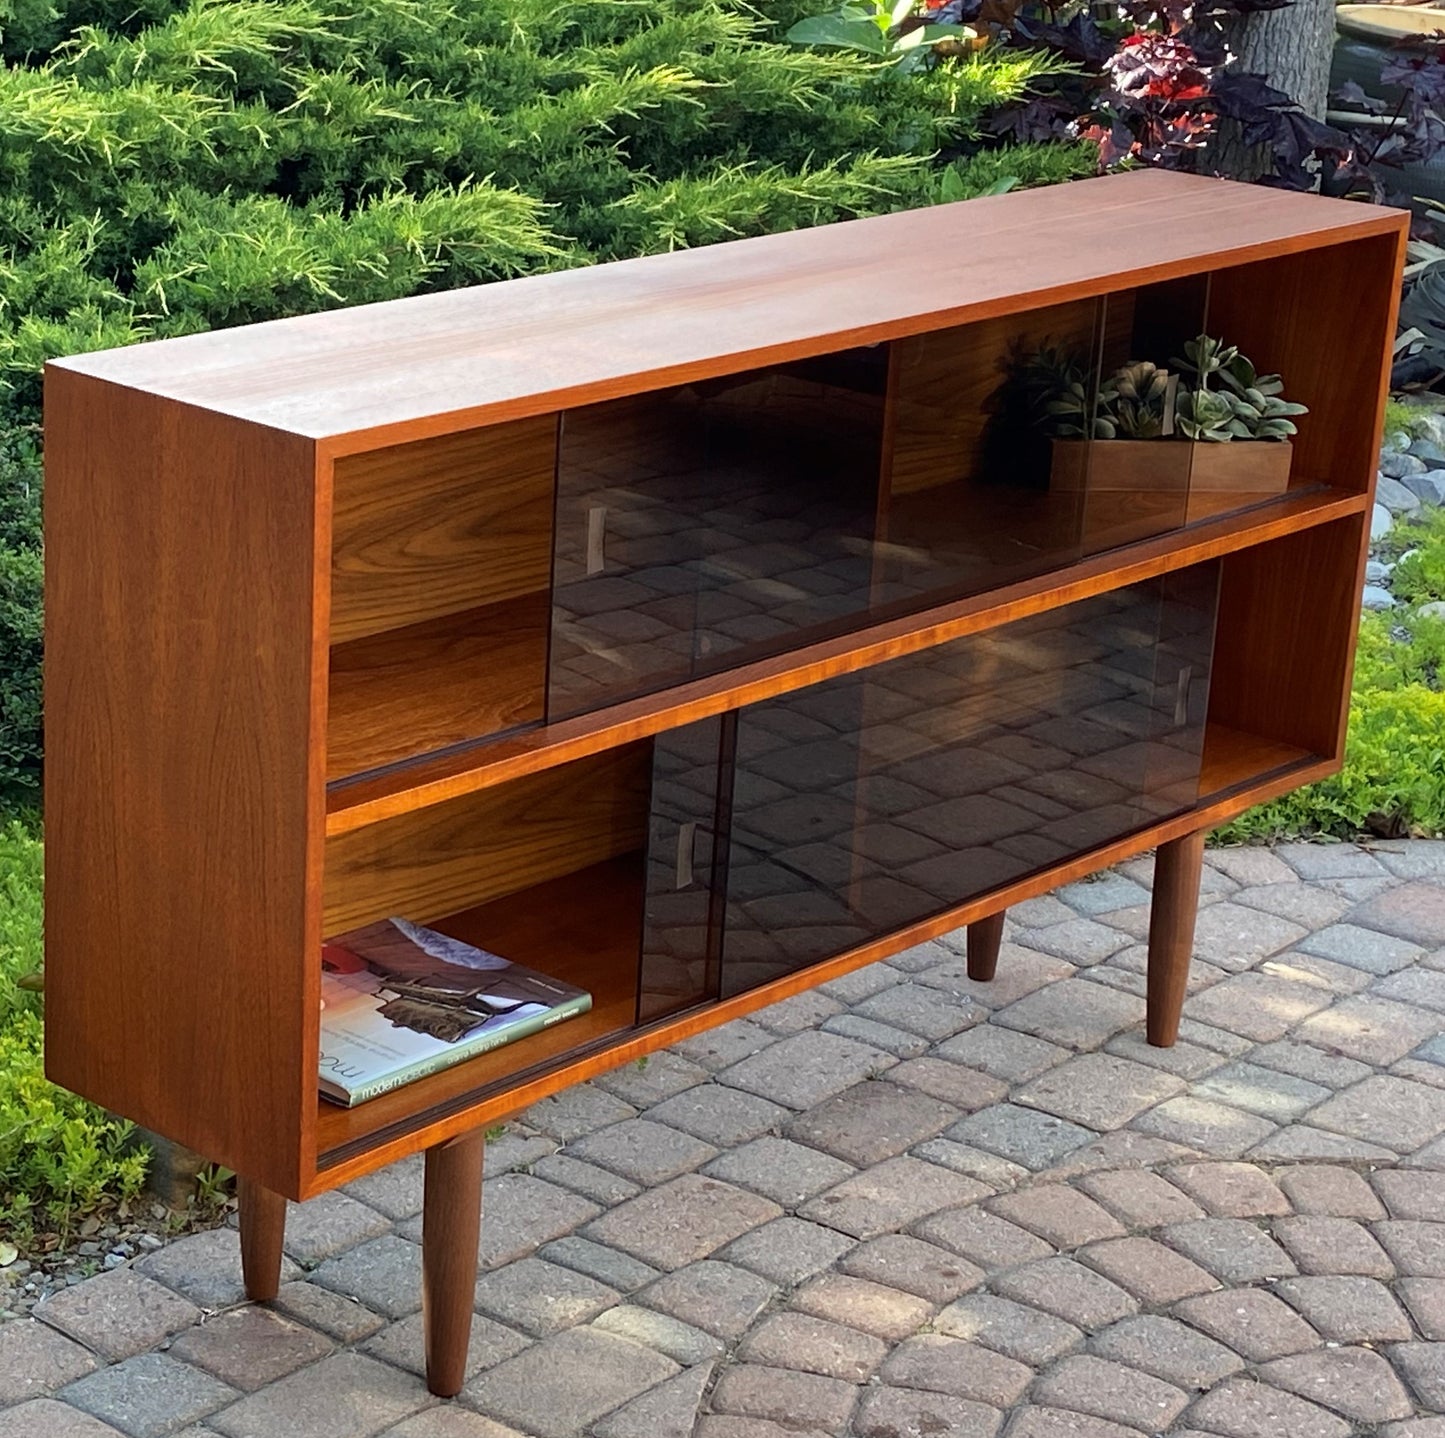 REFINISHED Mid Century Modern Teak Bookcase 5 ft, Perfect